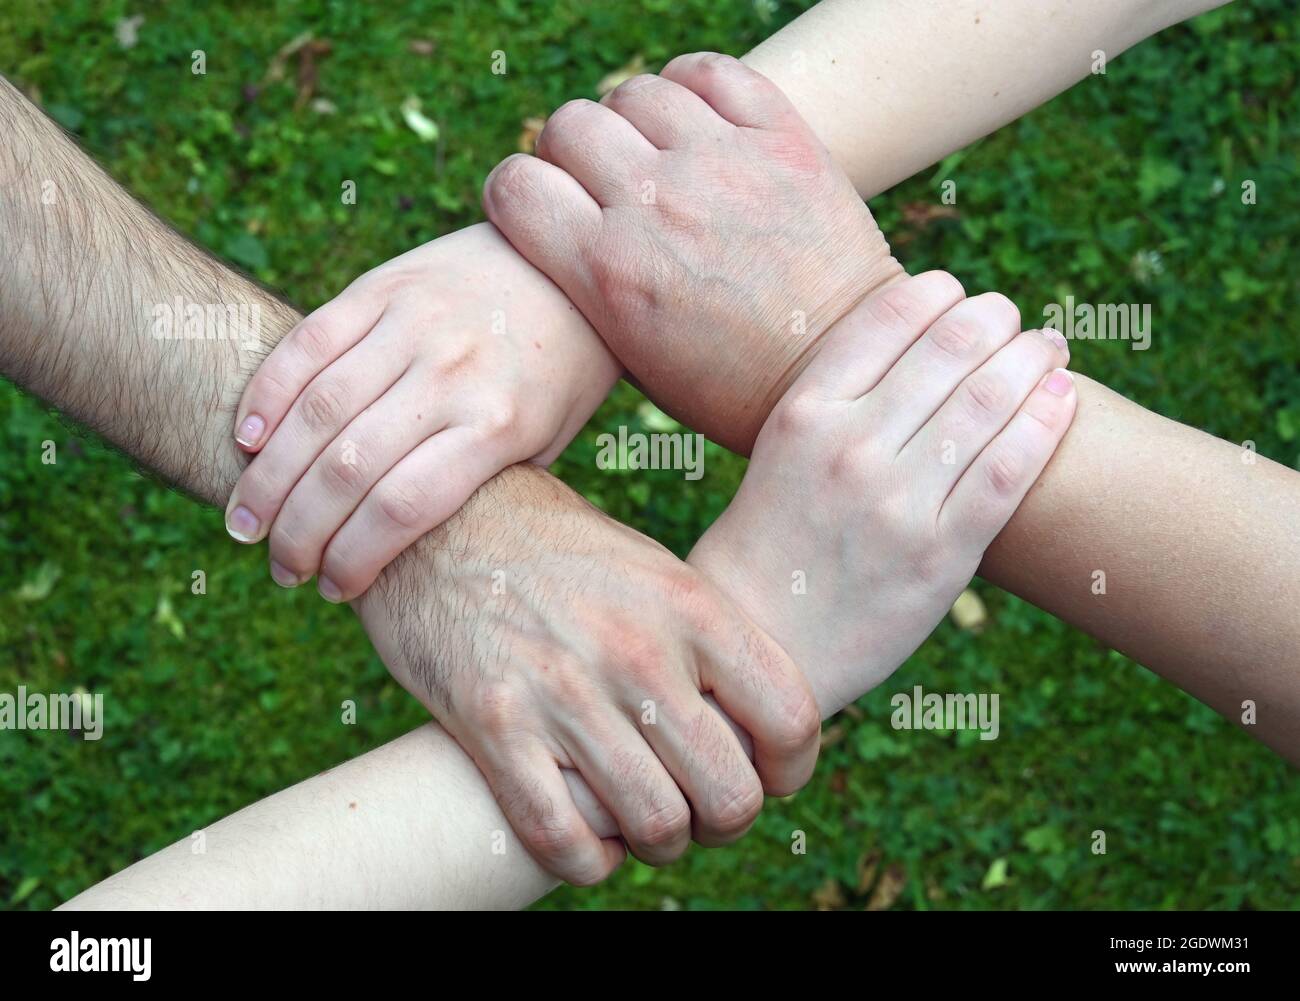 Four hands grip the wrist of the person in front of them, forming a square Stock Photo